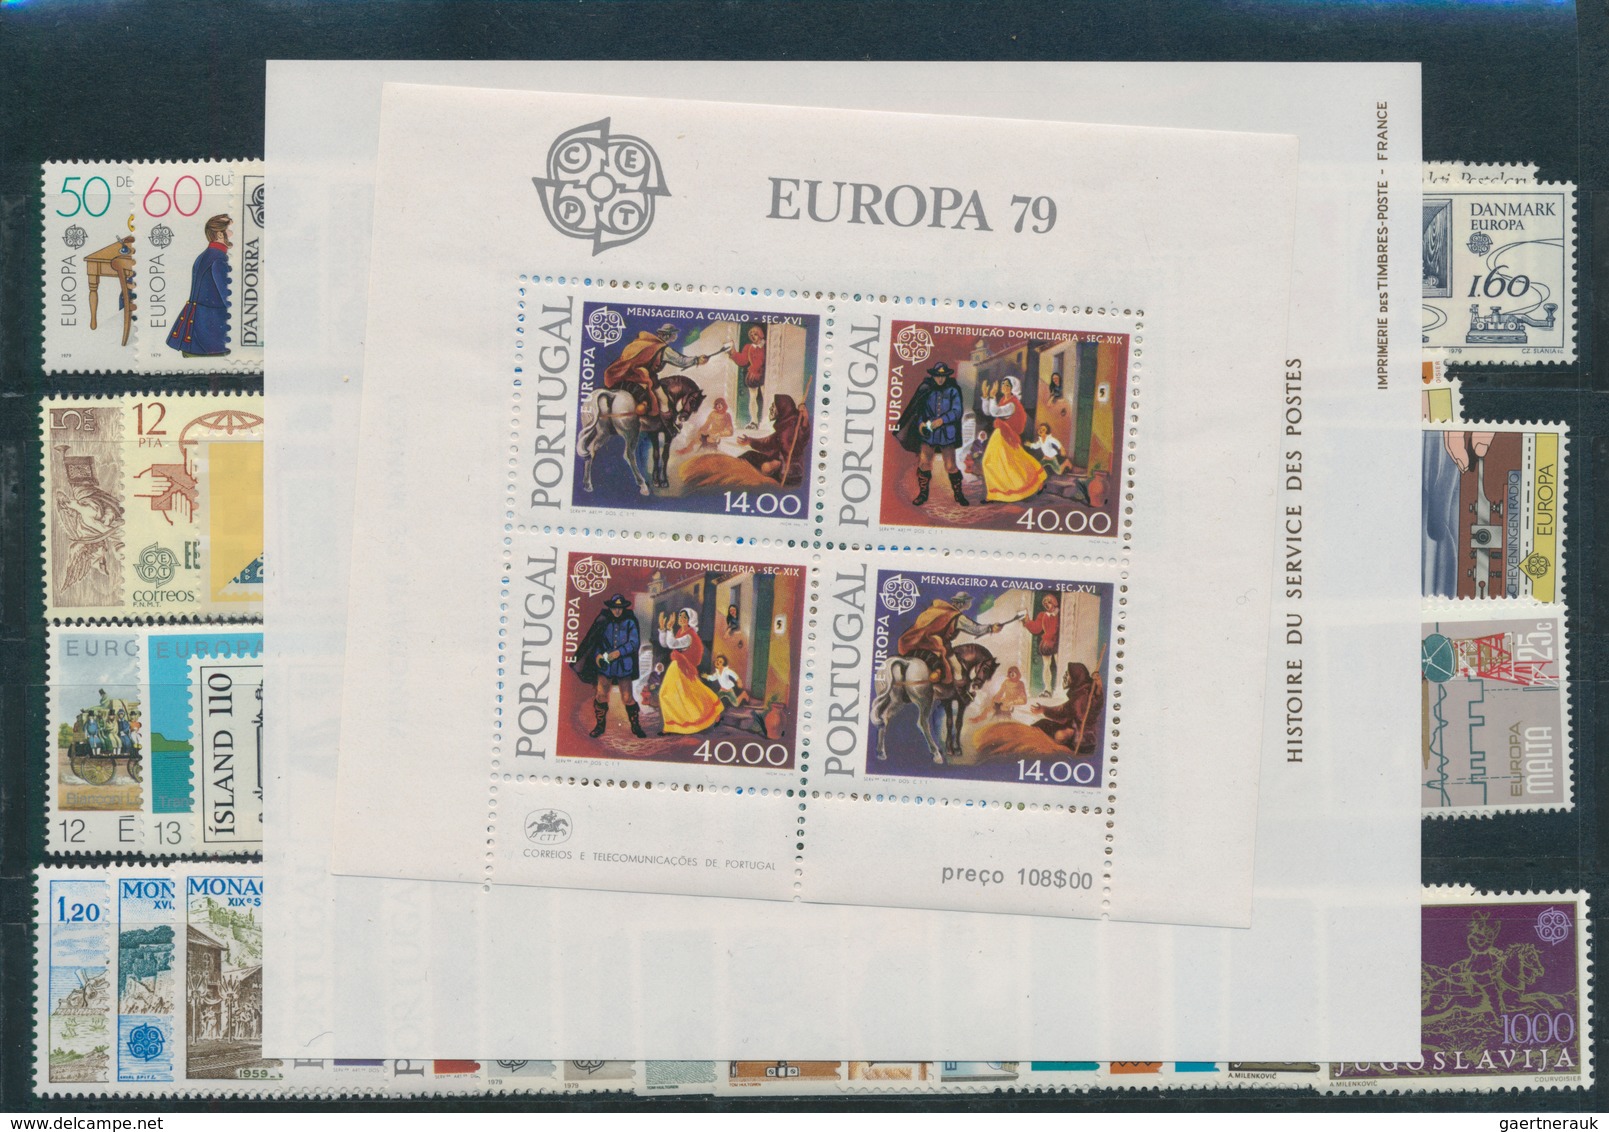 Europa-Union (CEPT): Mint never hinged collection of the joint issues; complete in the main numbers;